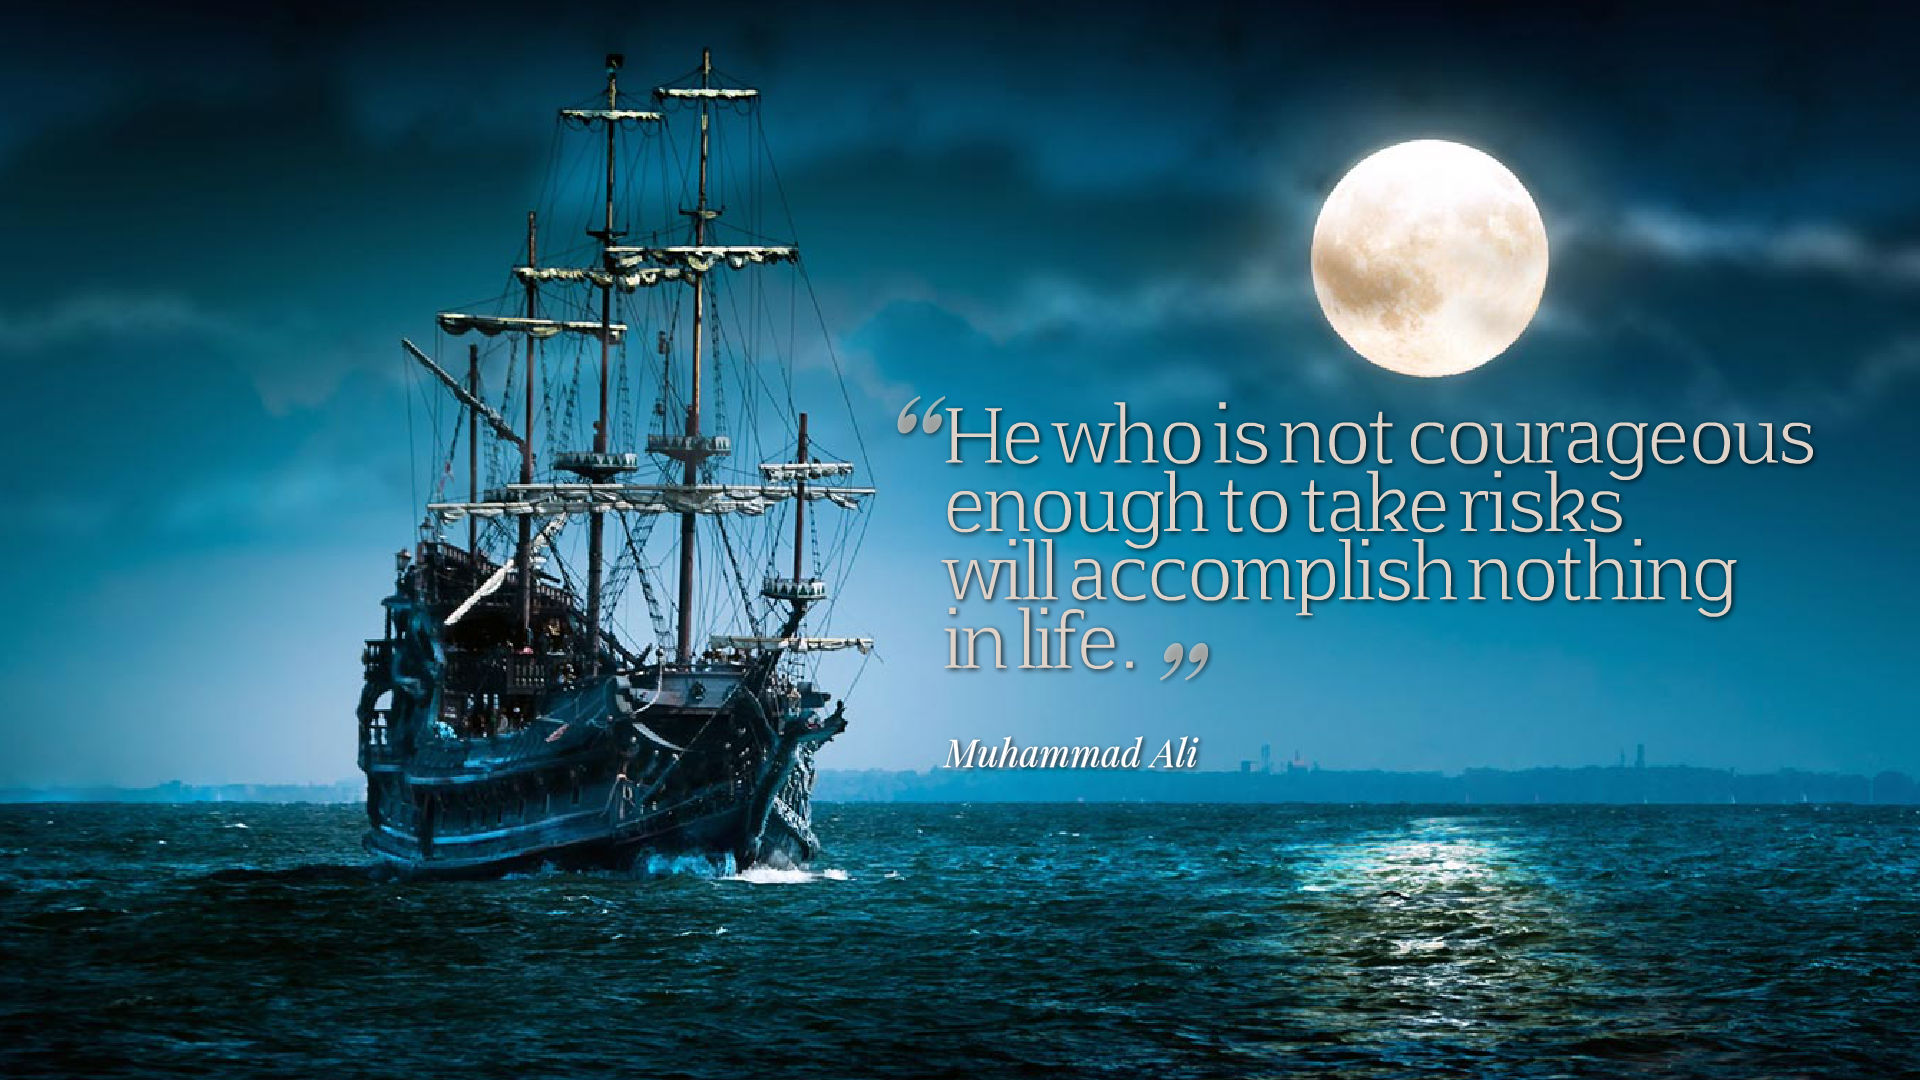 Courage Quotes Background Wallpaper 13650 - Baltana